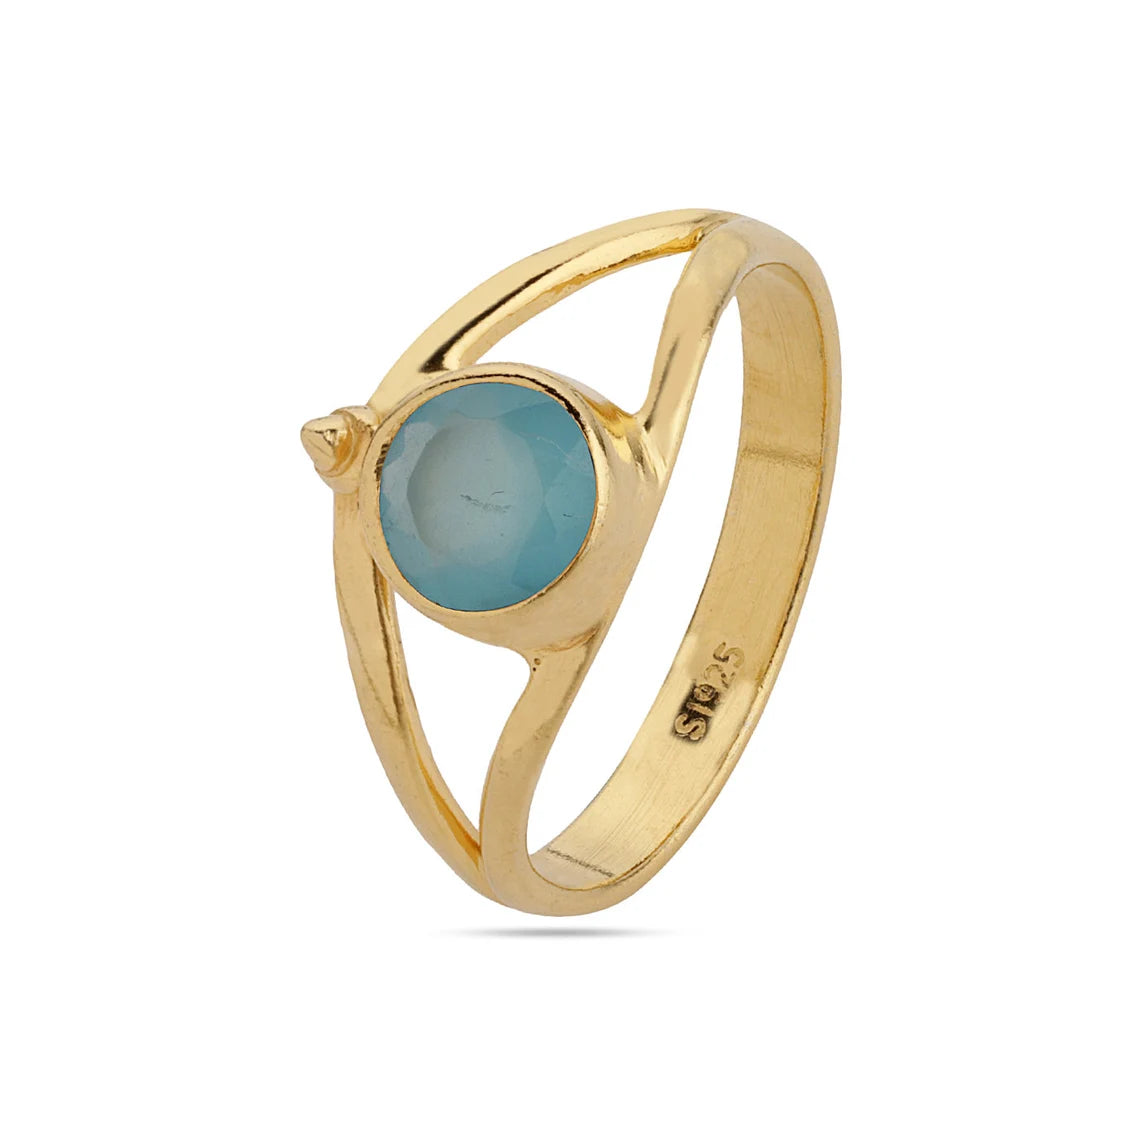 Gold Plated 925 Sterling Silve Ring wiht Blue Chalcedony Gemstone